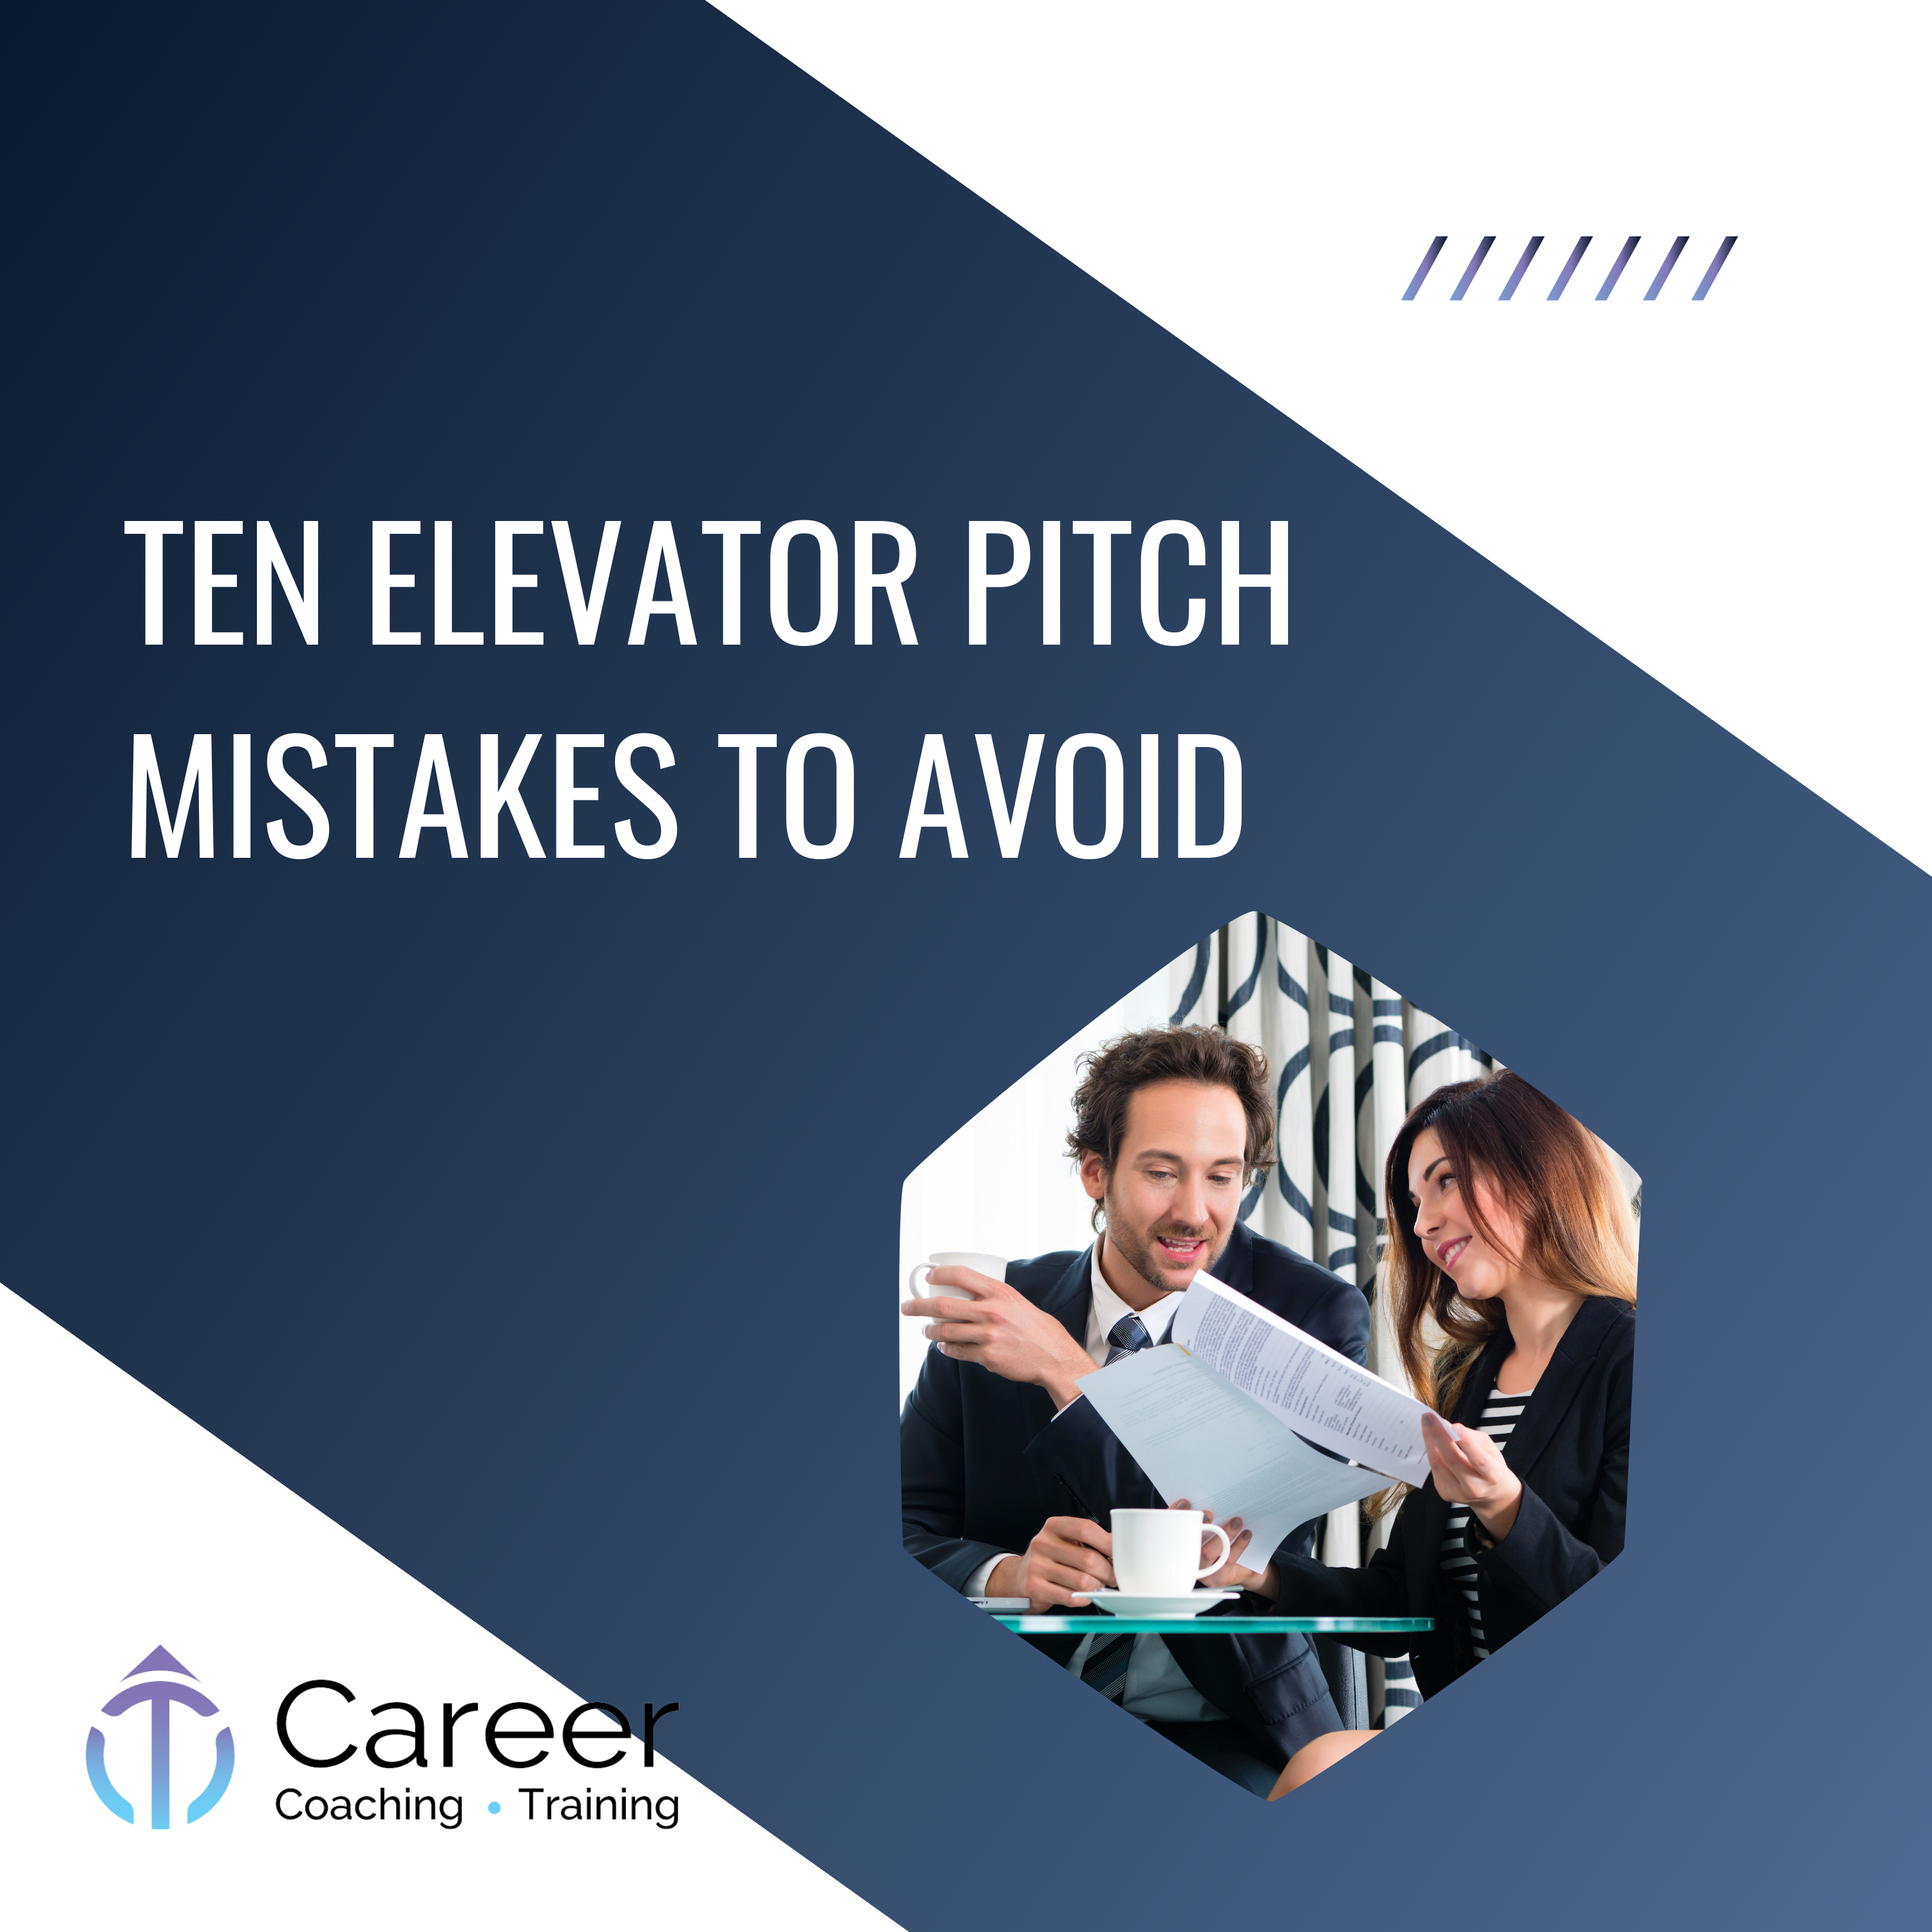 Ten Elevator Pitch Mistakes to Avoid